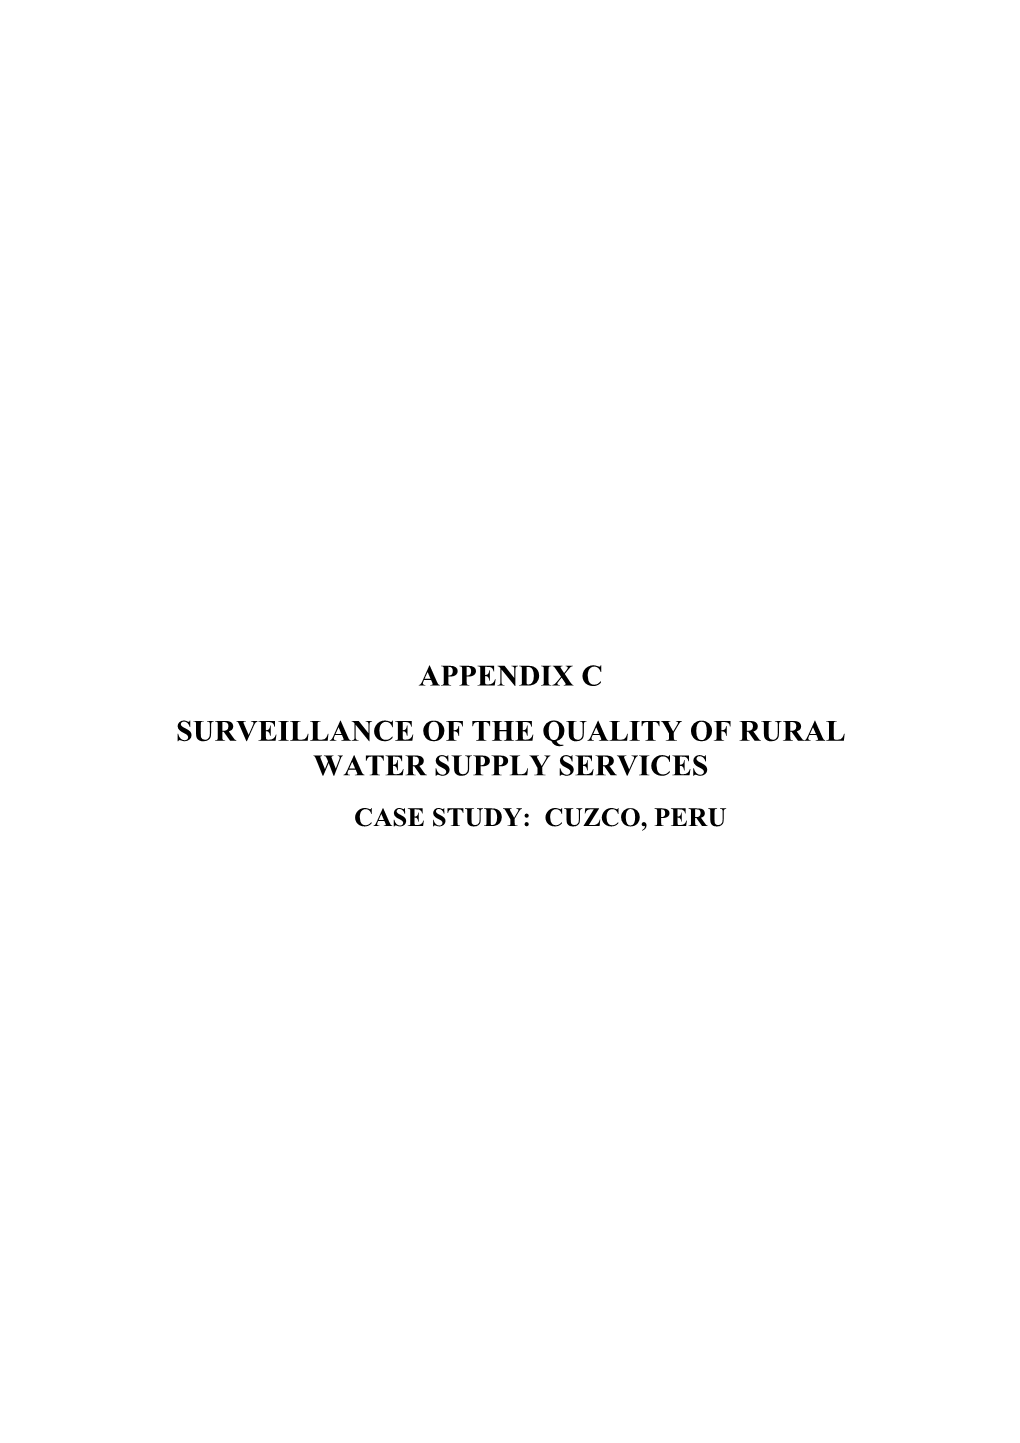 Appendix C Surveillance of the Quality of Rural Water